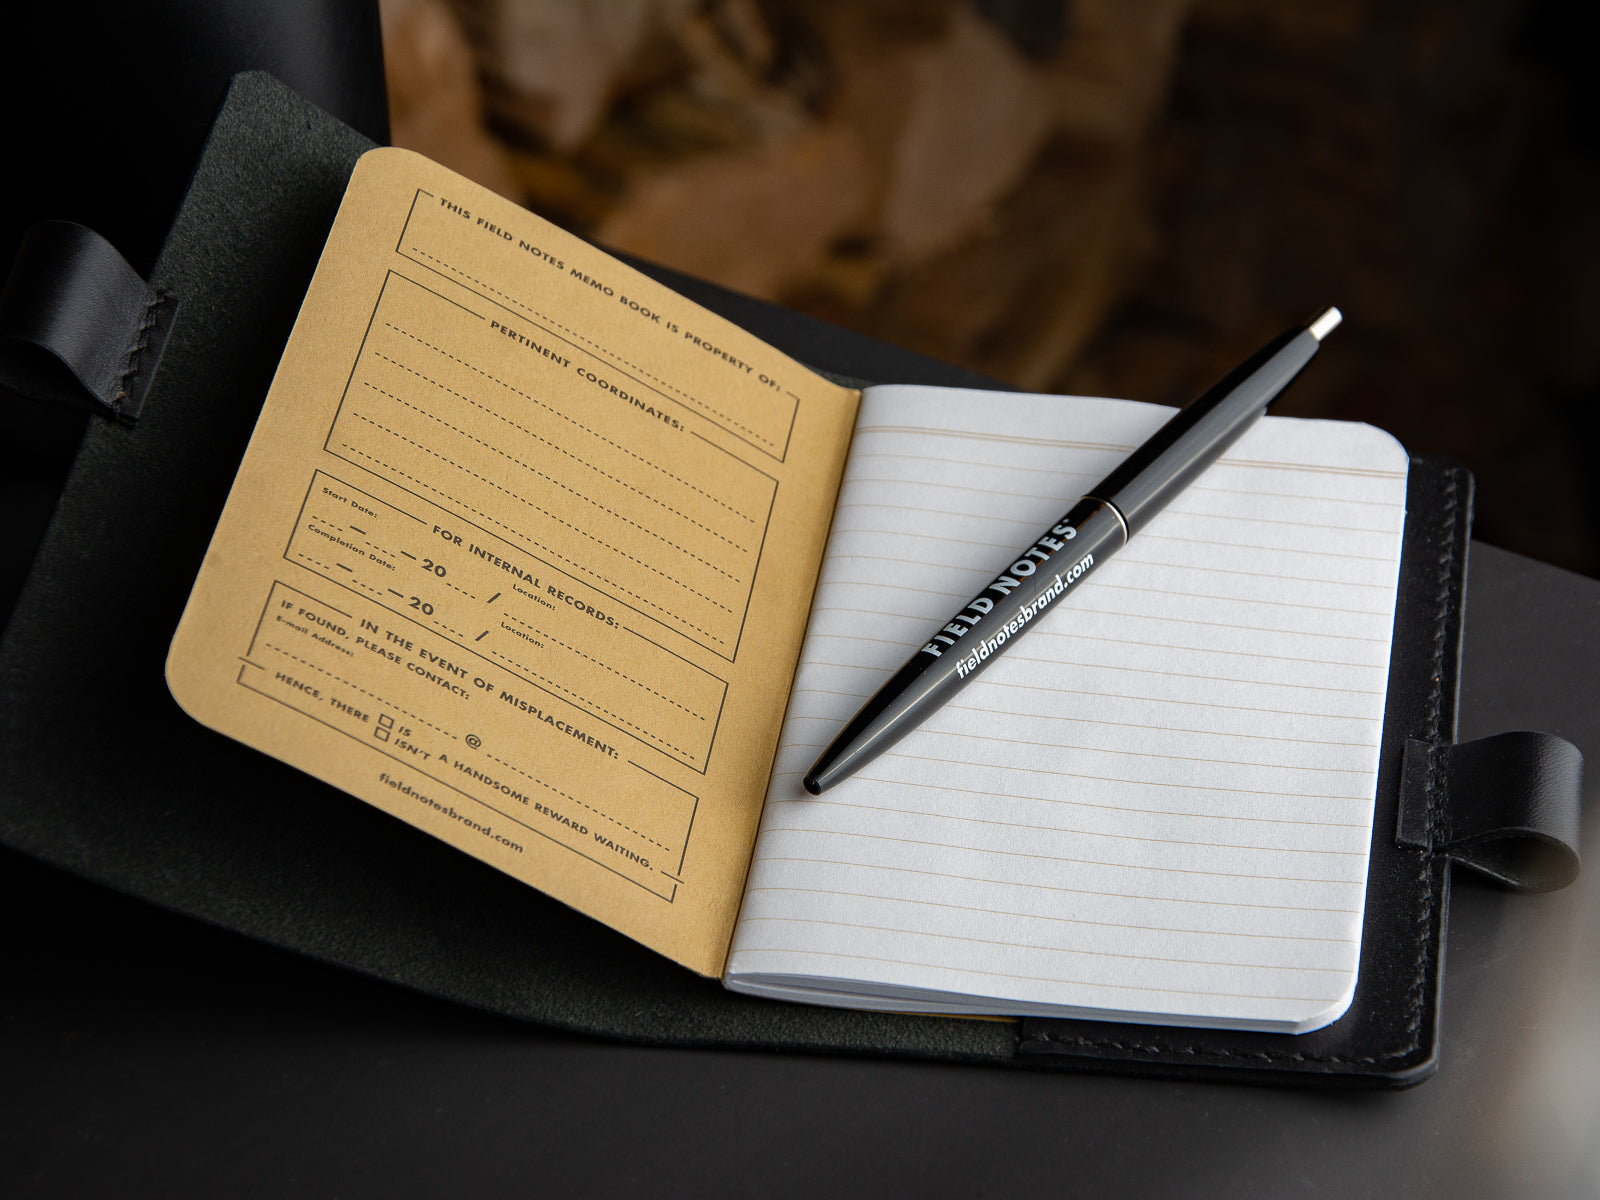 Black notebook sleeve sitting open showing field notes notebook